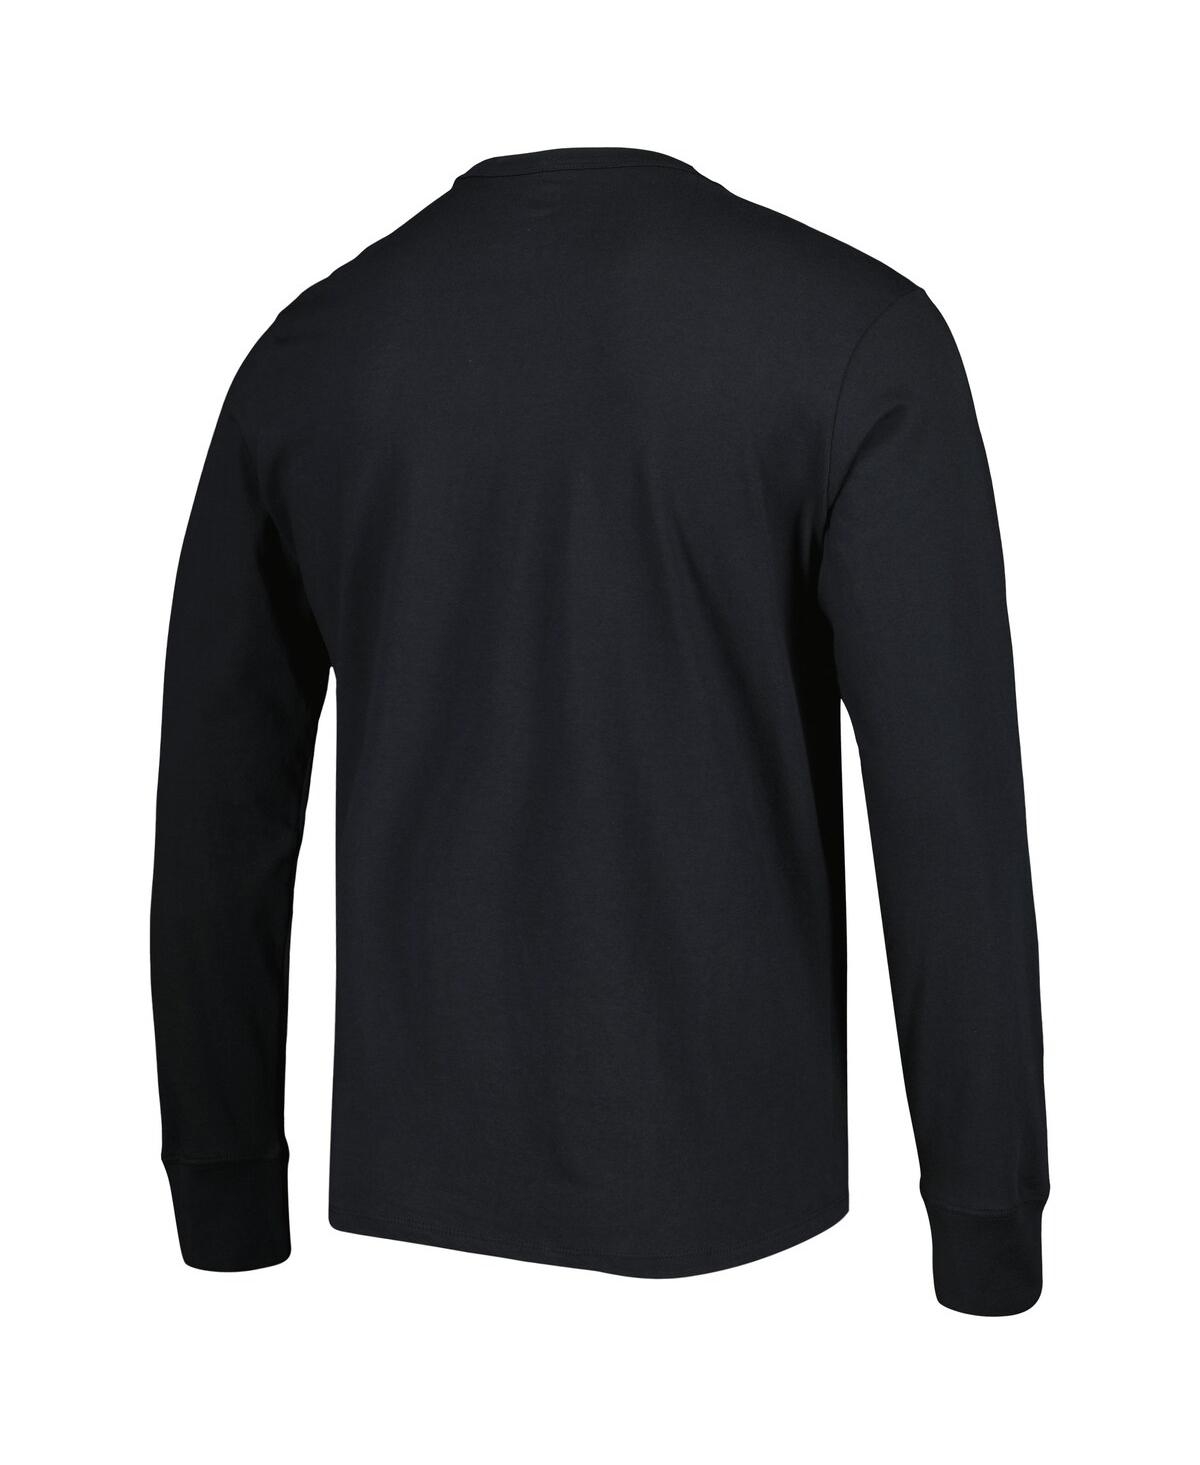 Shop 47 Brand Men's ' Black Tampa Bay Buccaneers Brand Wide Out Franklin Long Sleeve T-shirt